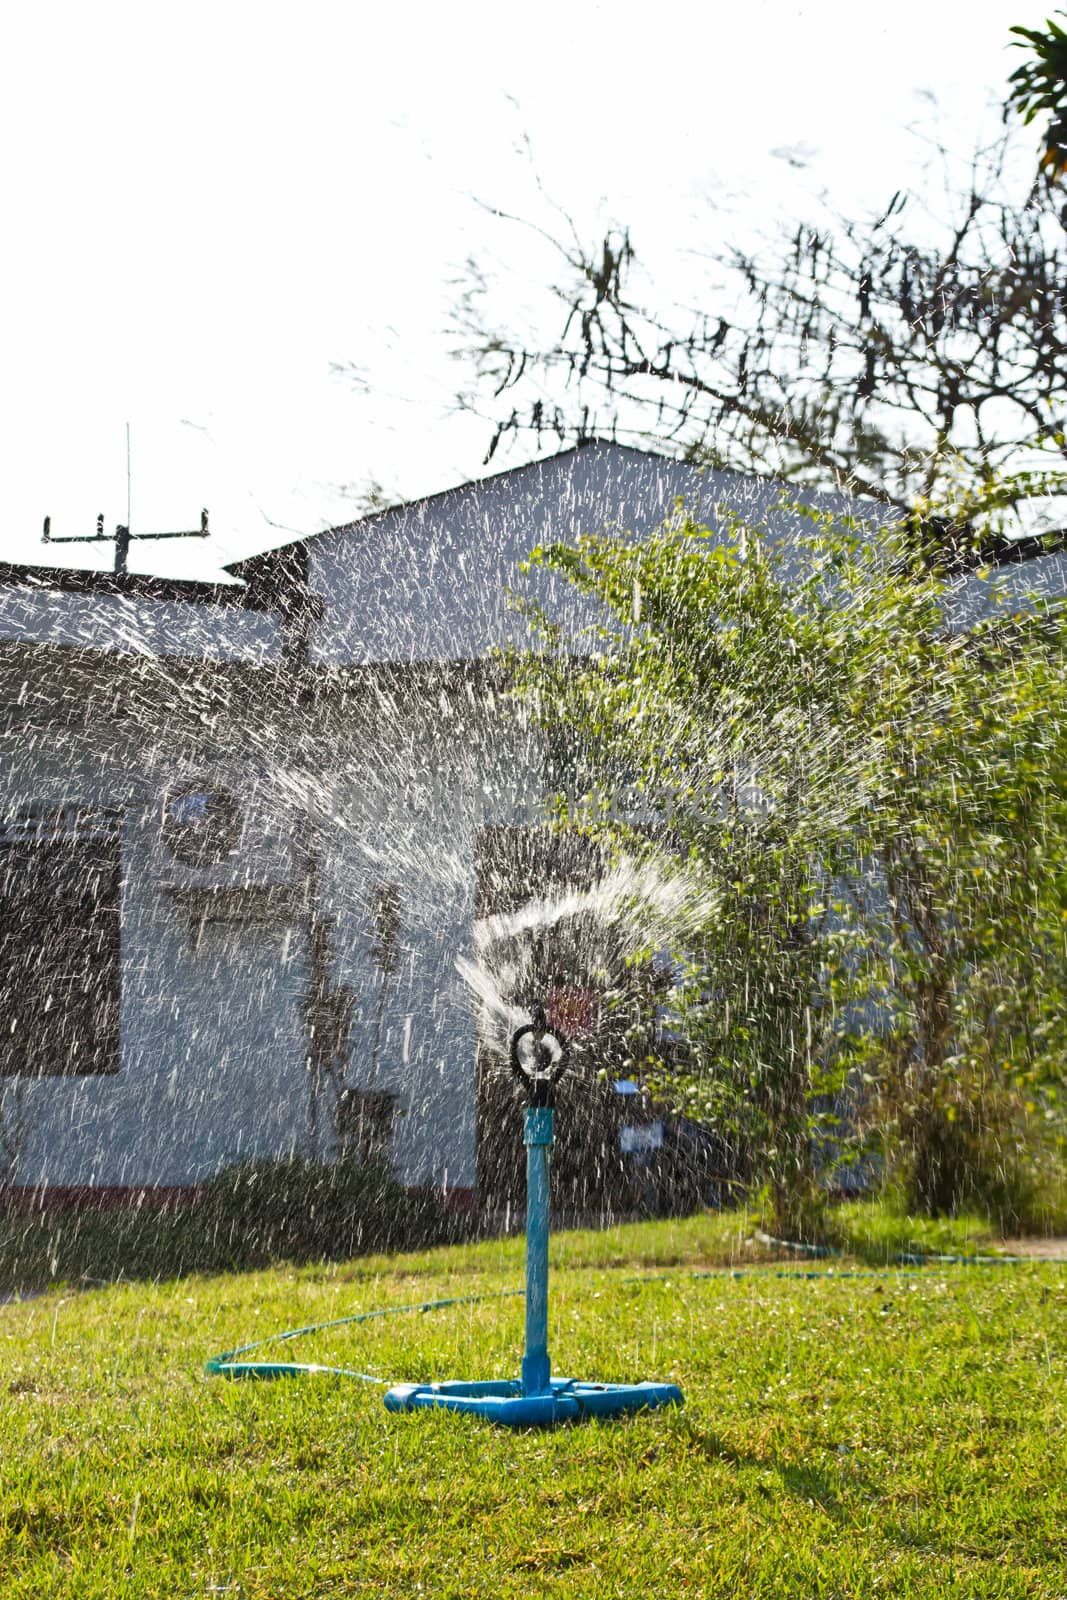 Water from the sprinkler